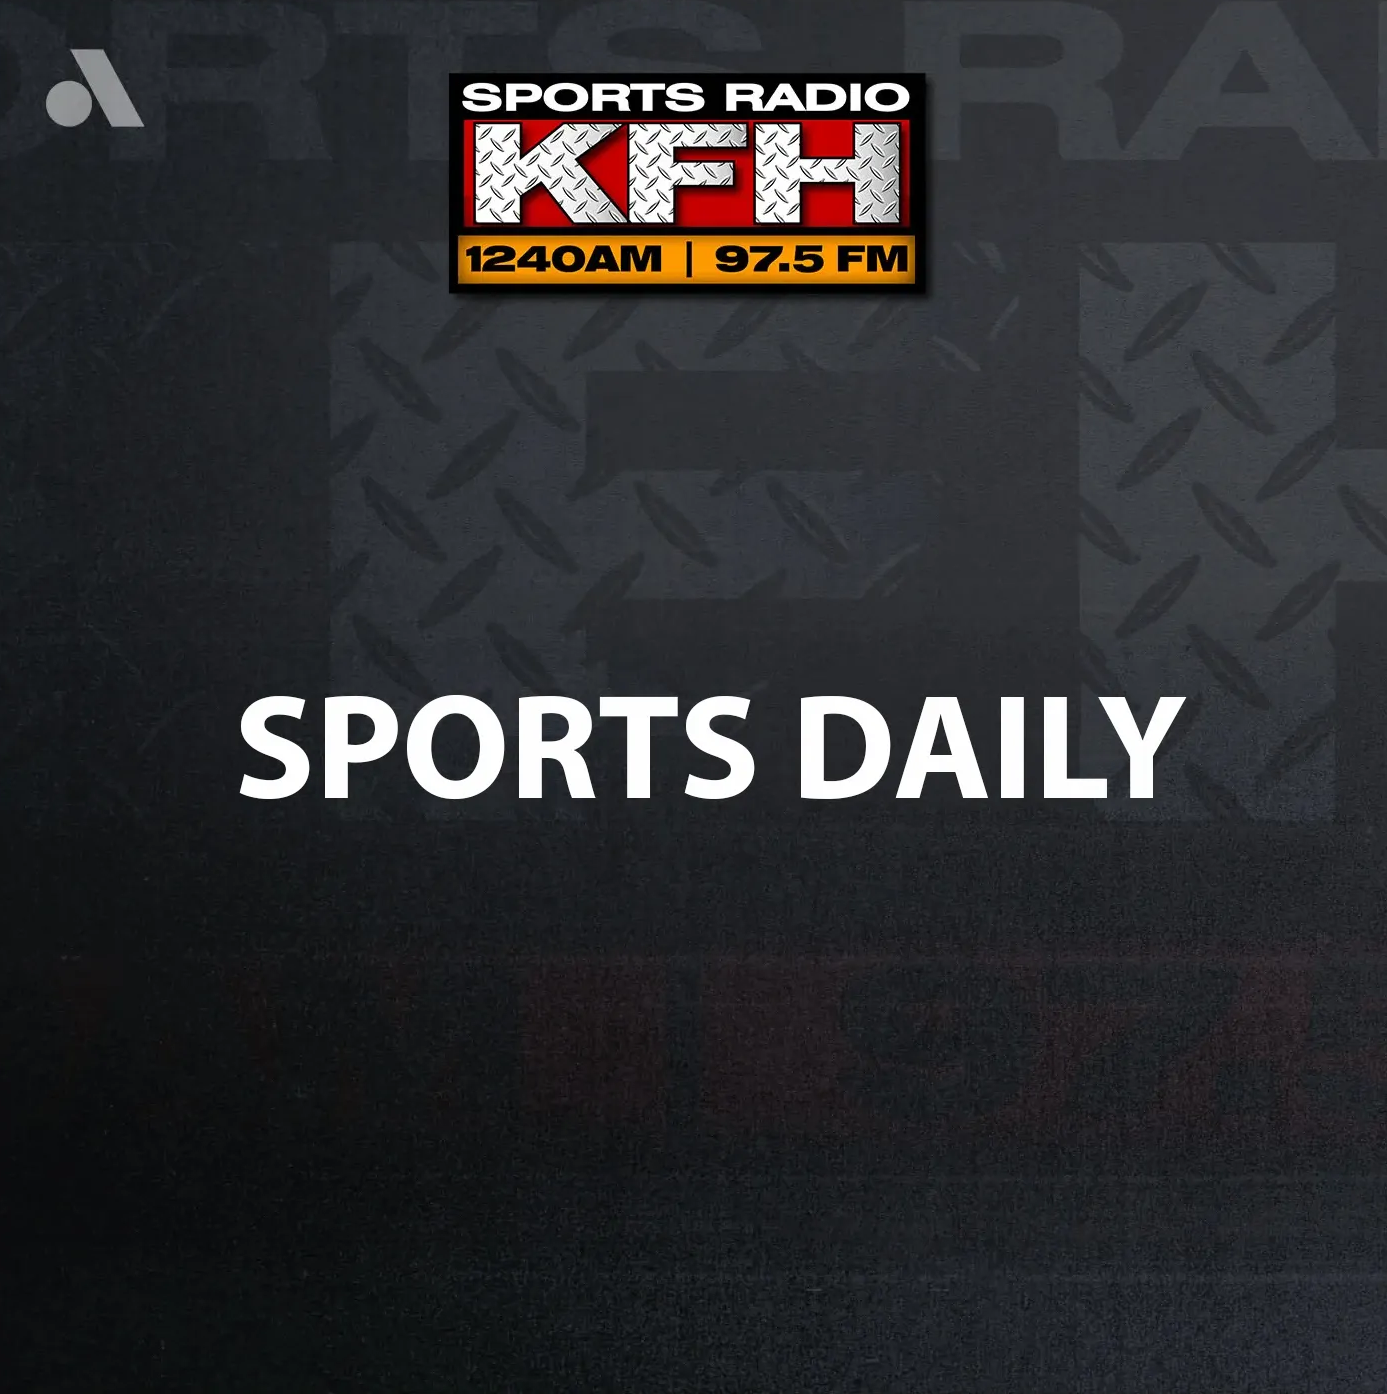 A new partnership for Sports Daily